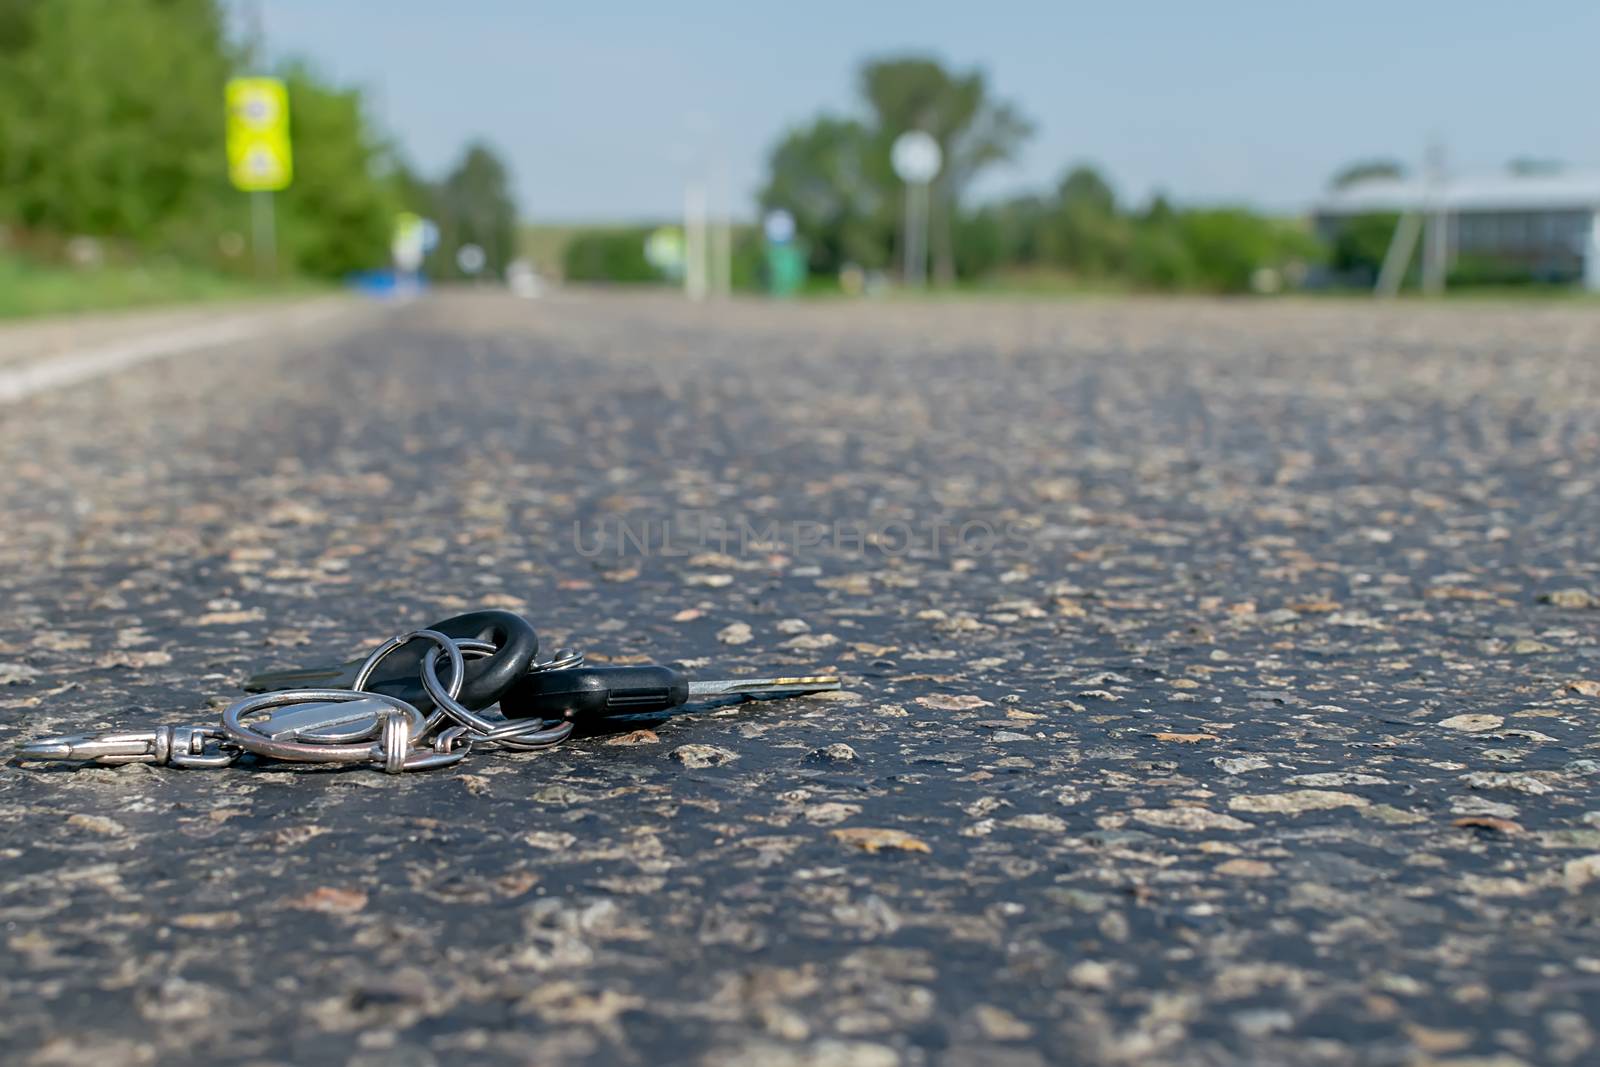 Lost a bunch of keys lying on the asphalt surface of the roadway